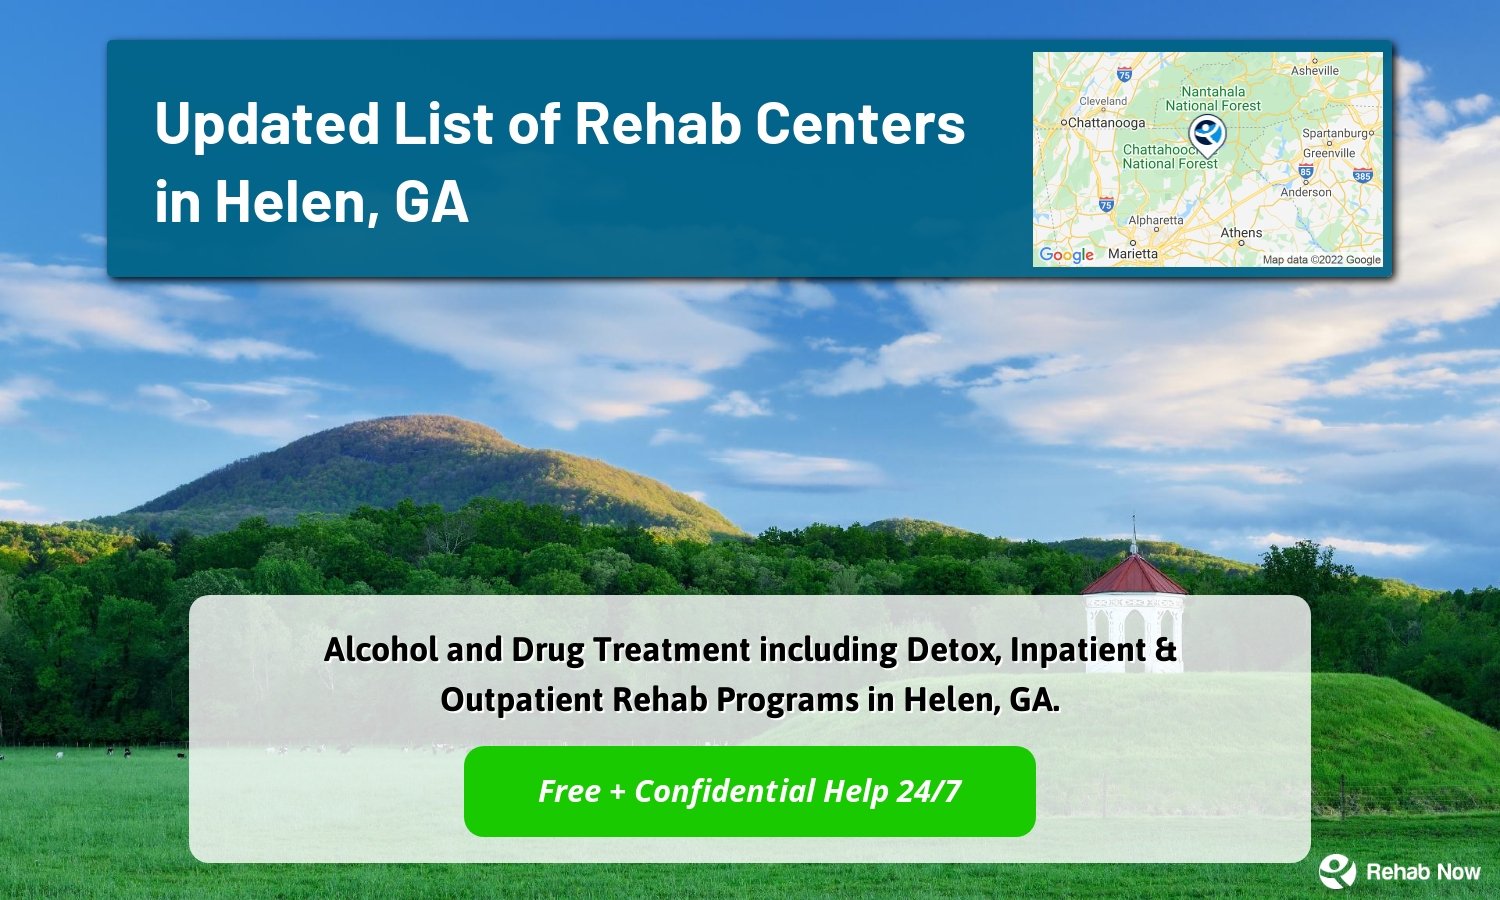 Alcohol and Drug Treatment including Detox, Inpatient & Outpatient Rehab Programs in Helen, GA.